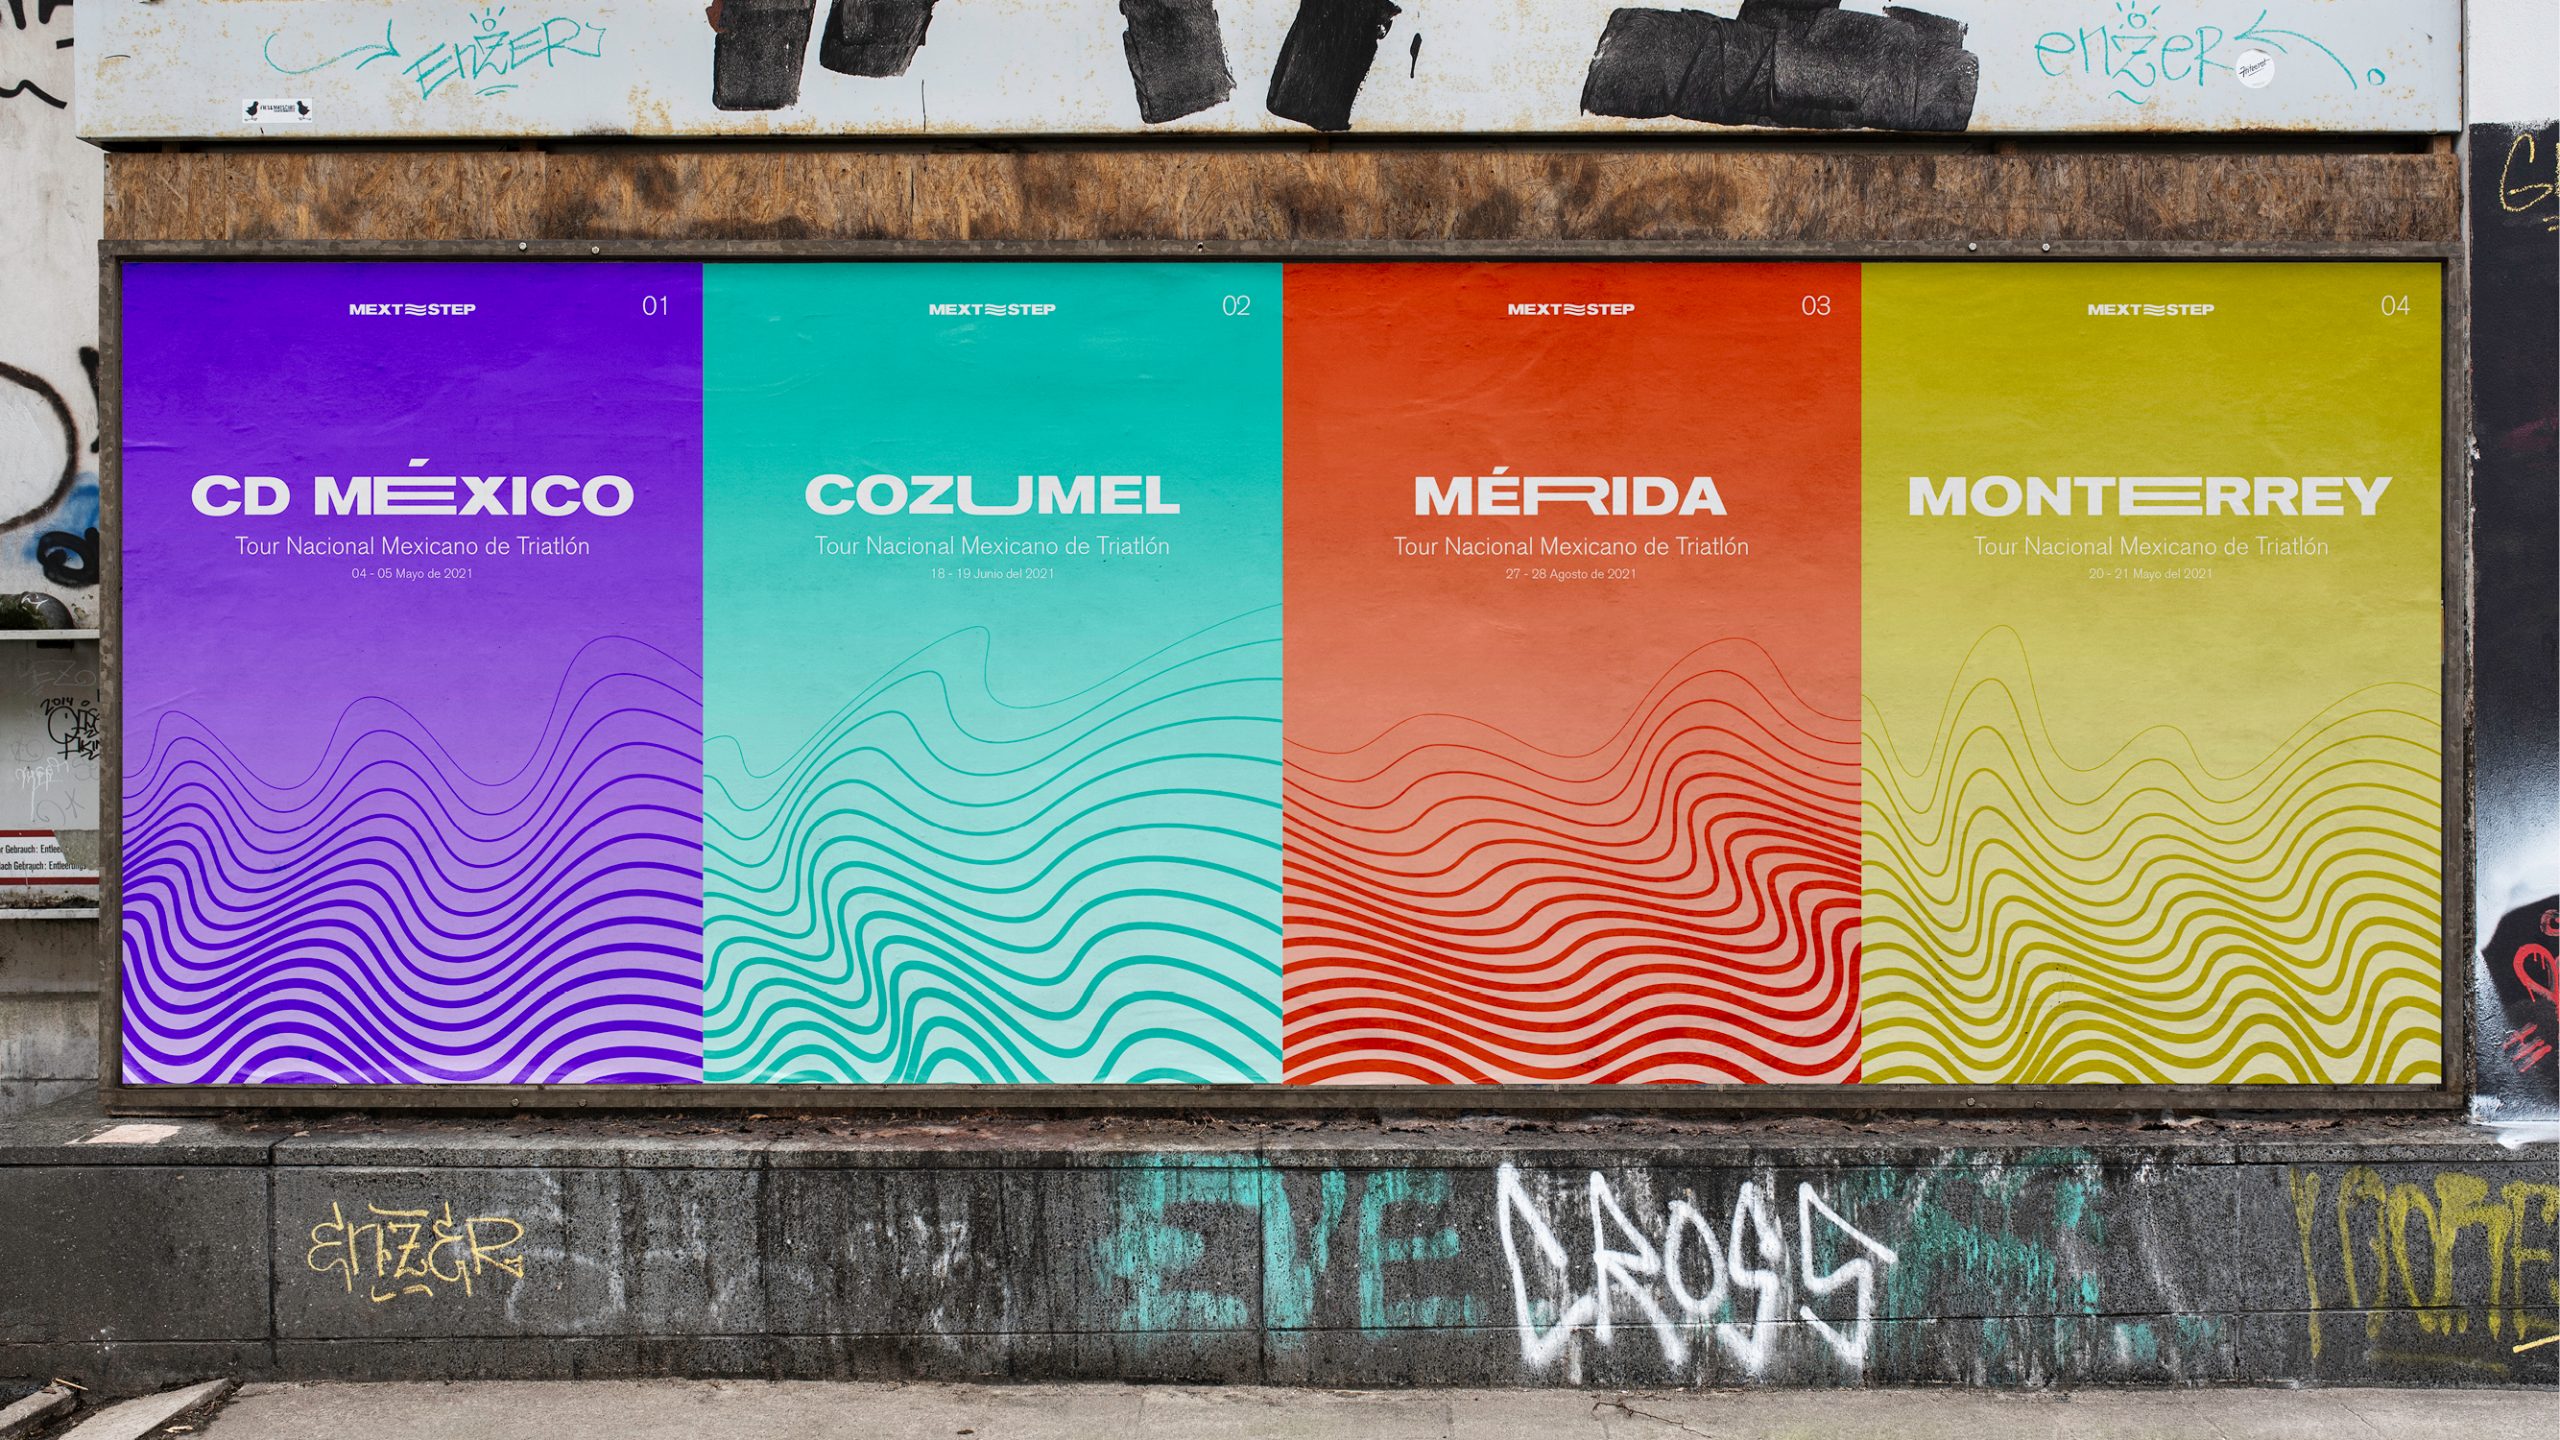 4 posters, for a different city, in different colors, purple, teal, orange and yellow, on a wall